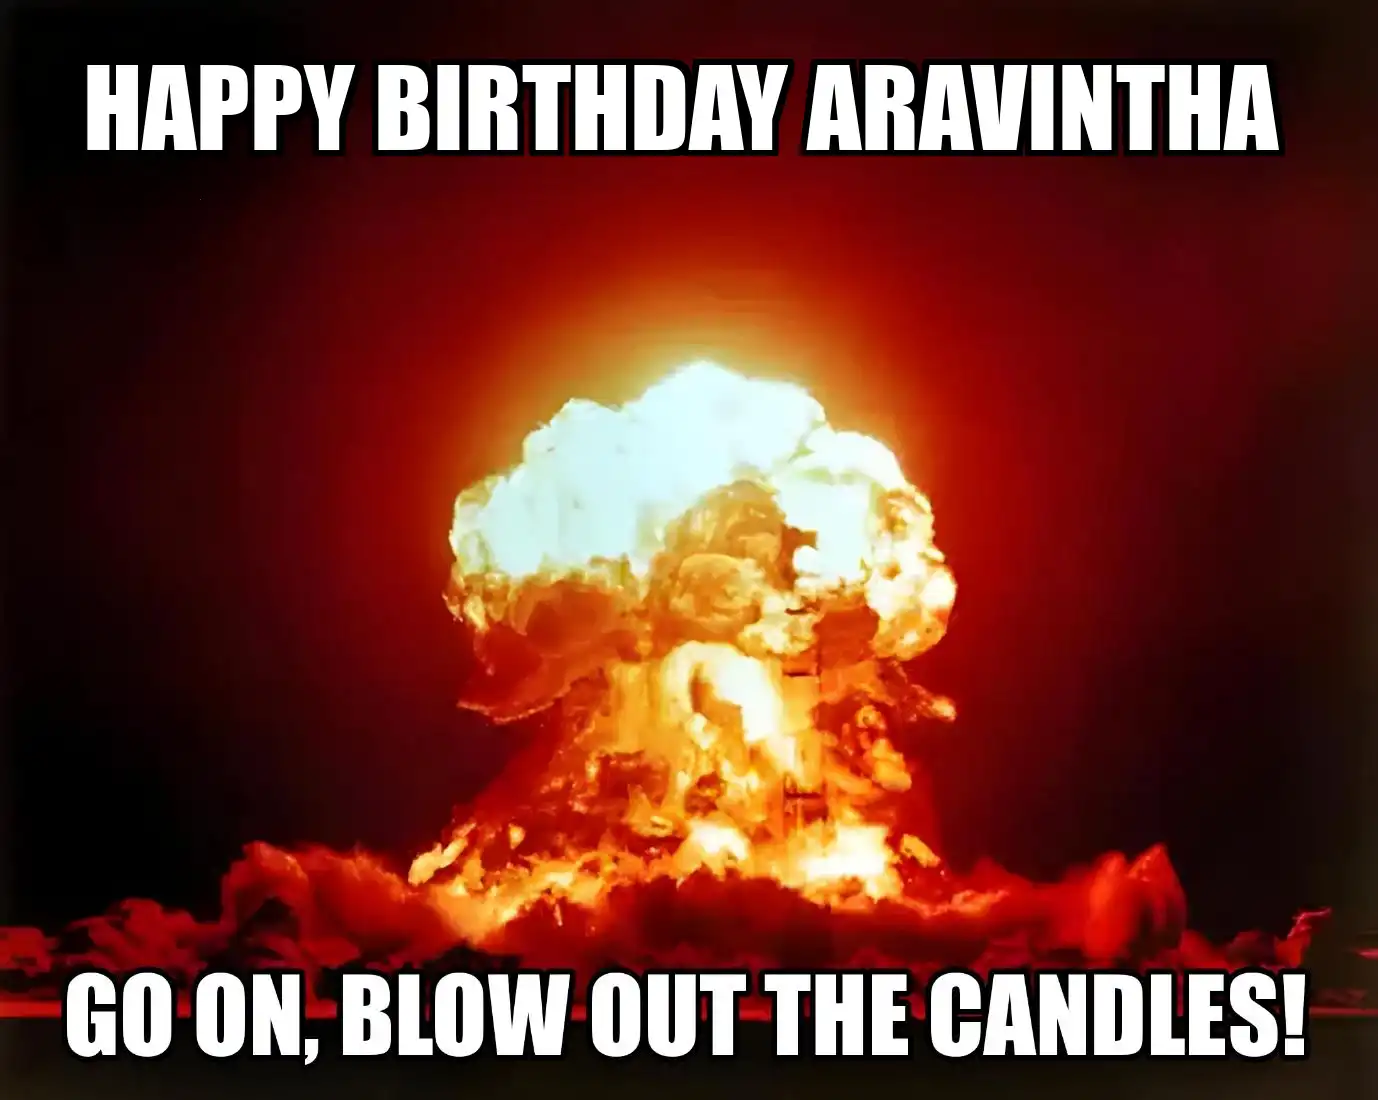 Happy Birthday Aravintha Go On Blow Out The Candles Meme